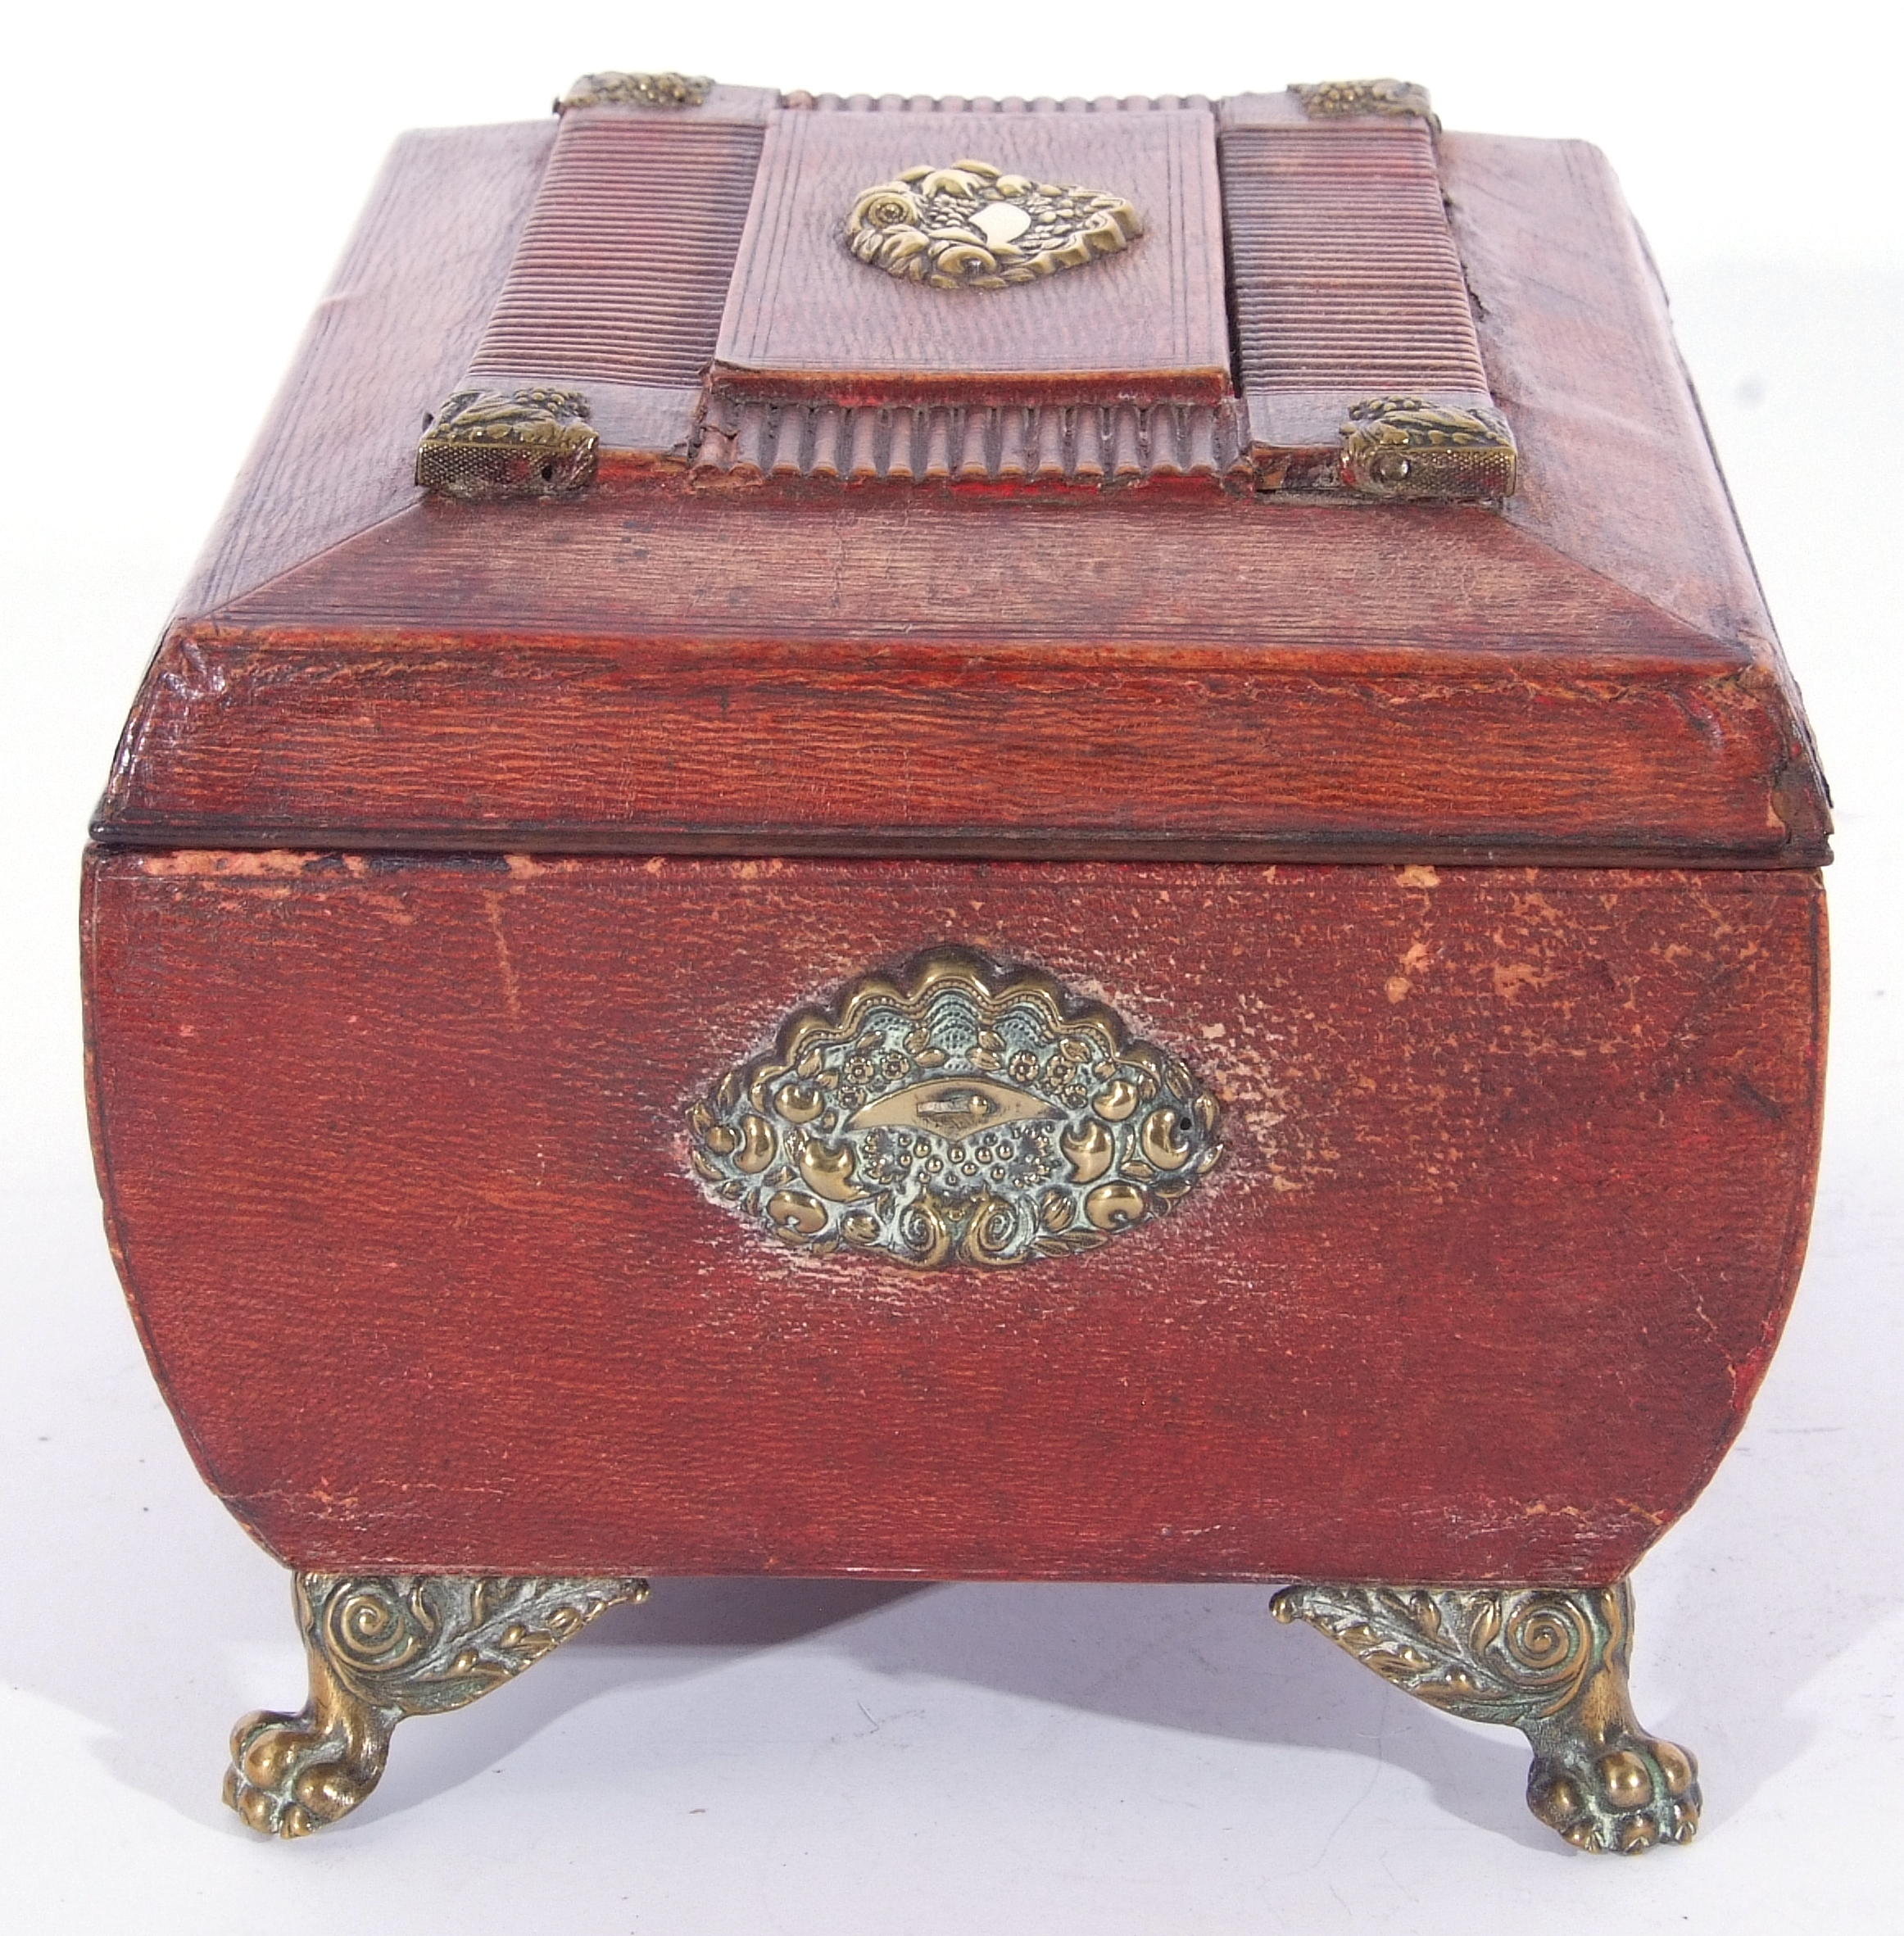 Regency red leather and brass embossed jewel box, hinged lid with silk lined interior, single drawer - Image 7 of 11